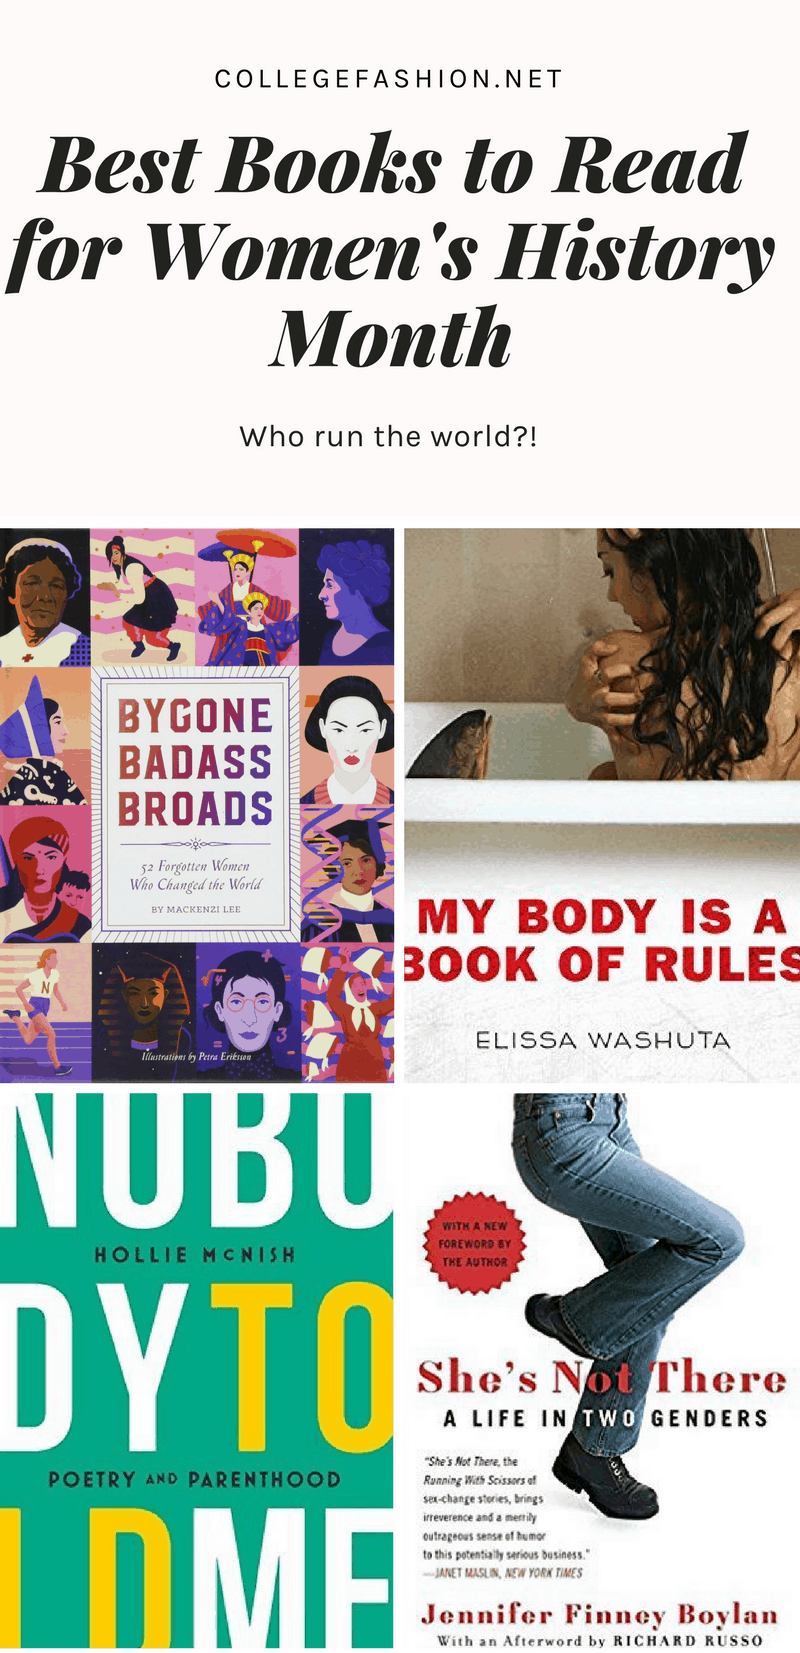 Best books for women's history month 2018